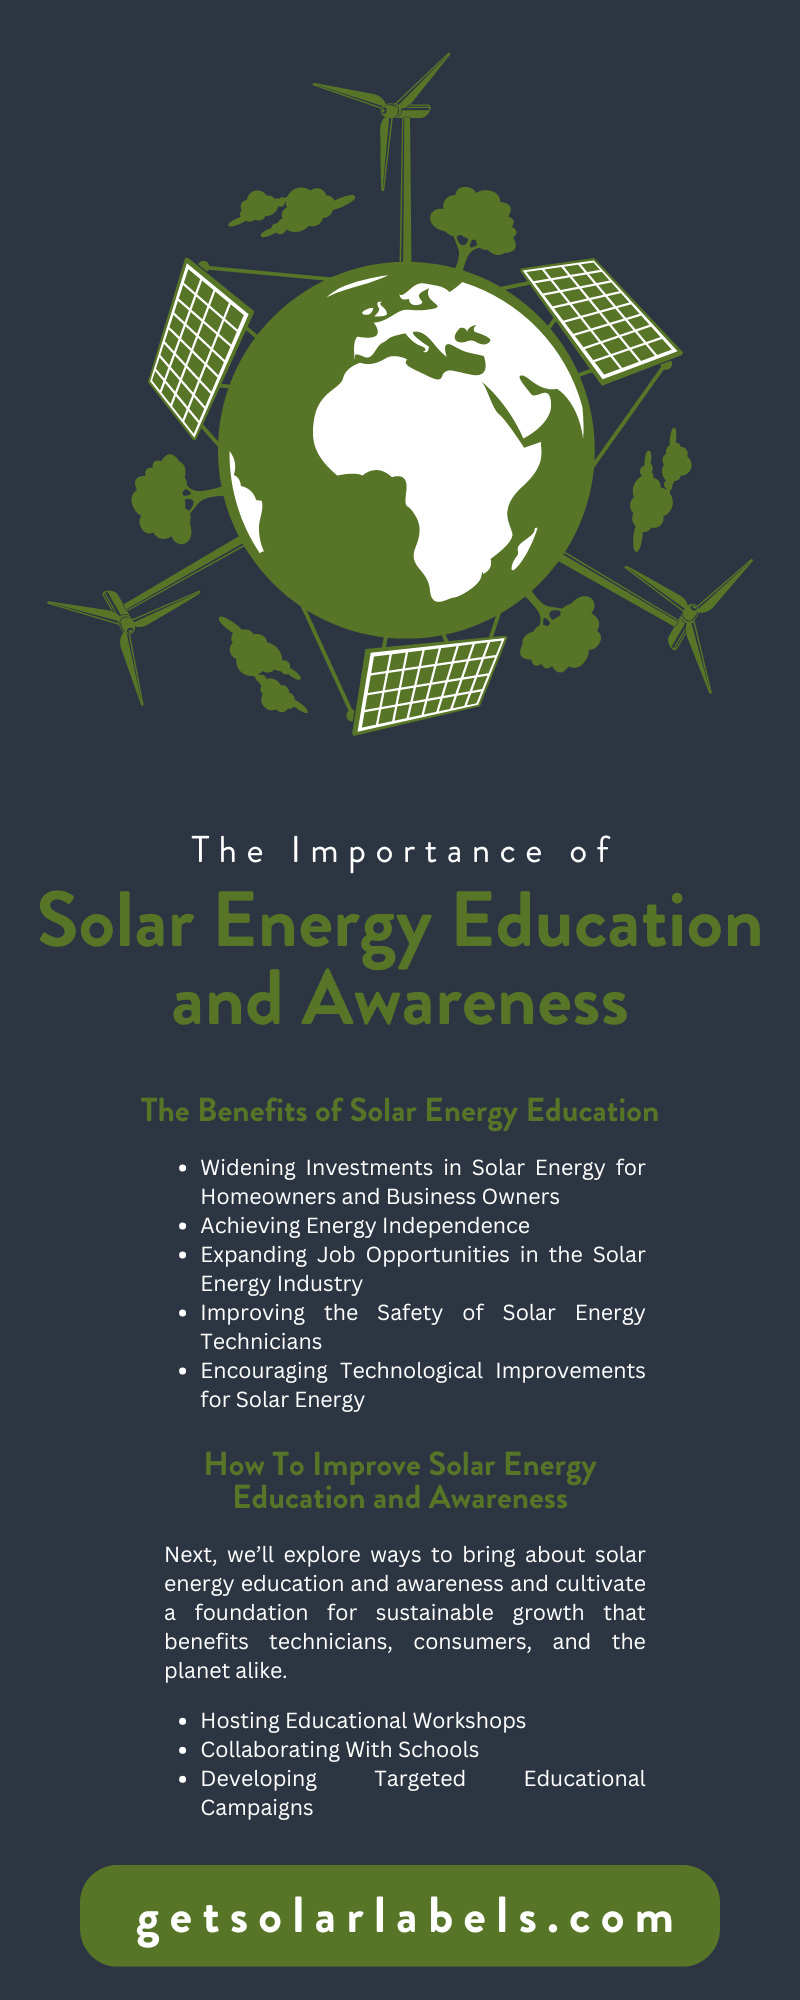 The Importance of Solar Energy Education and Awareness